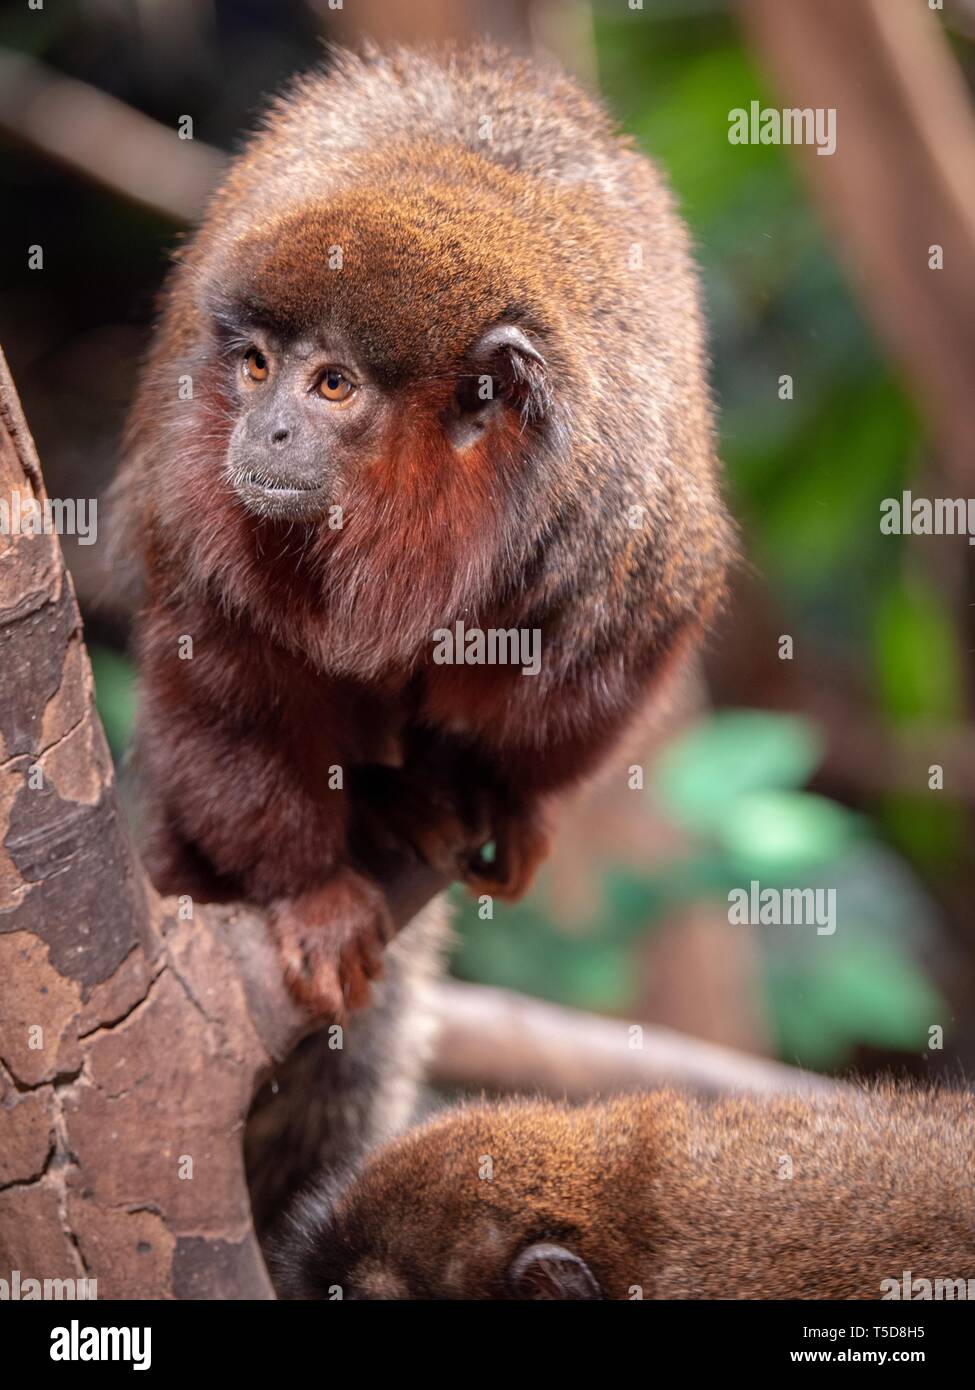 A red titi monkey balancing on a small branch among trees Stock Photo